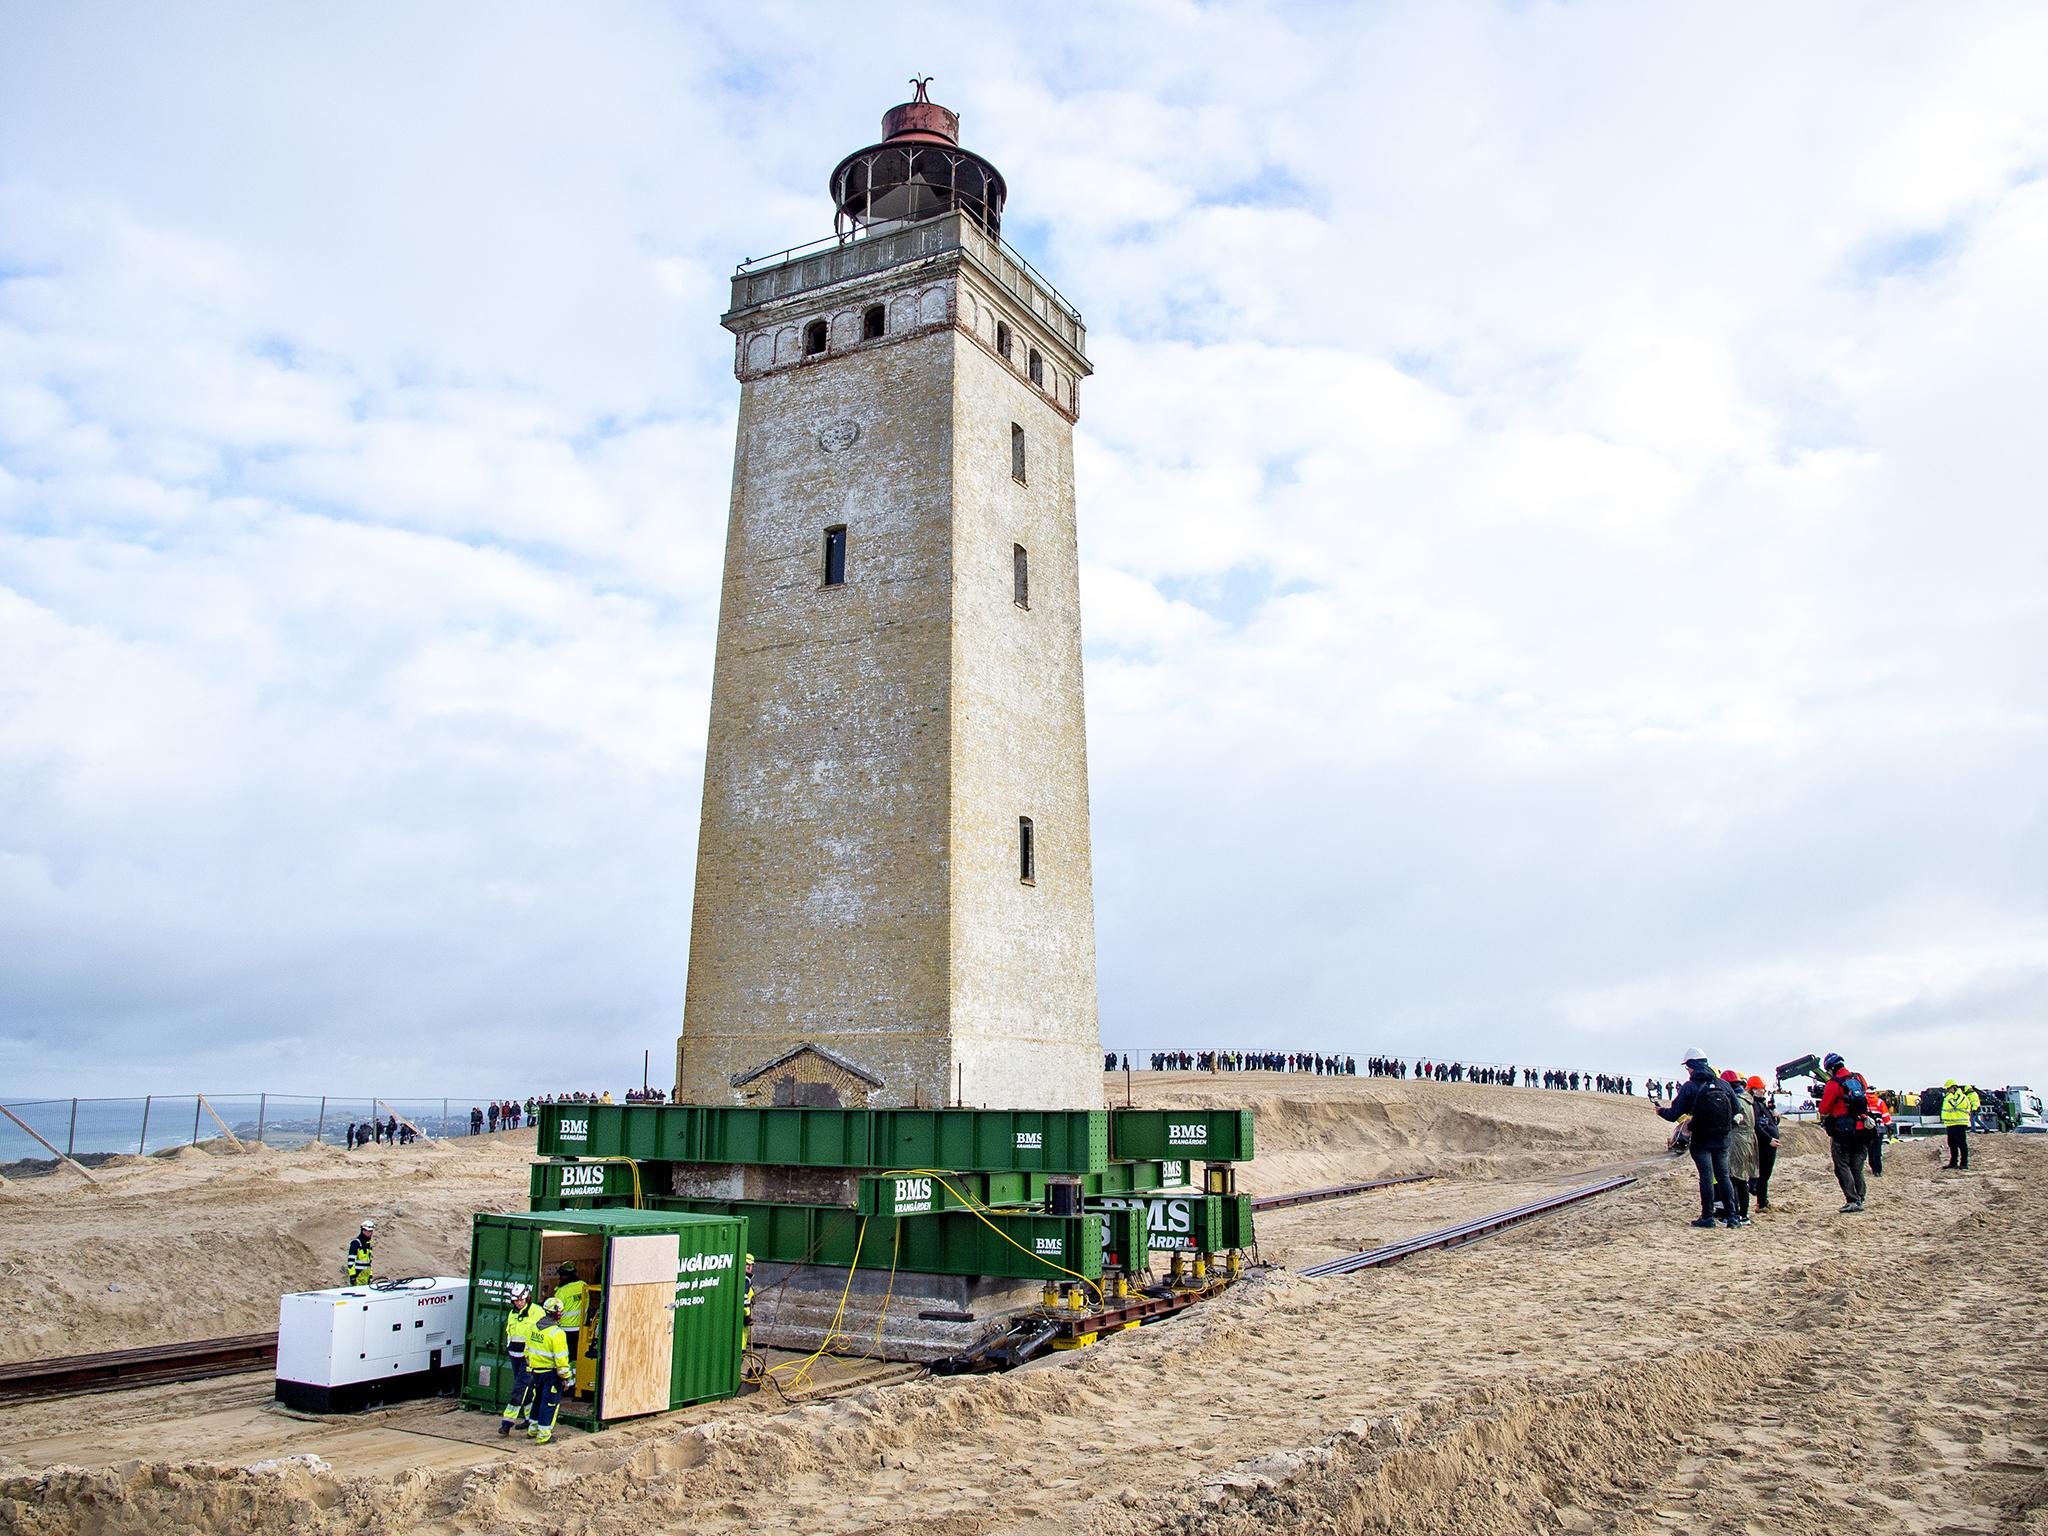 Rubjerg Knude lighthouse once stood 650 feet from the shore